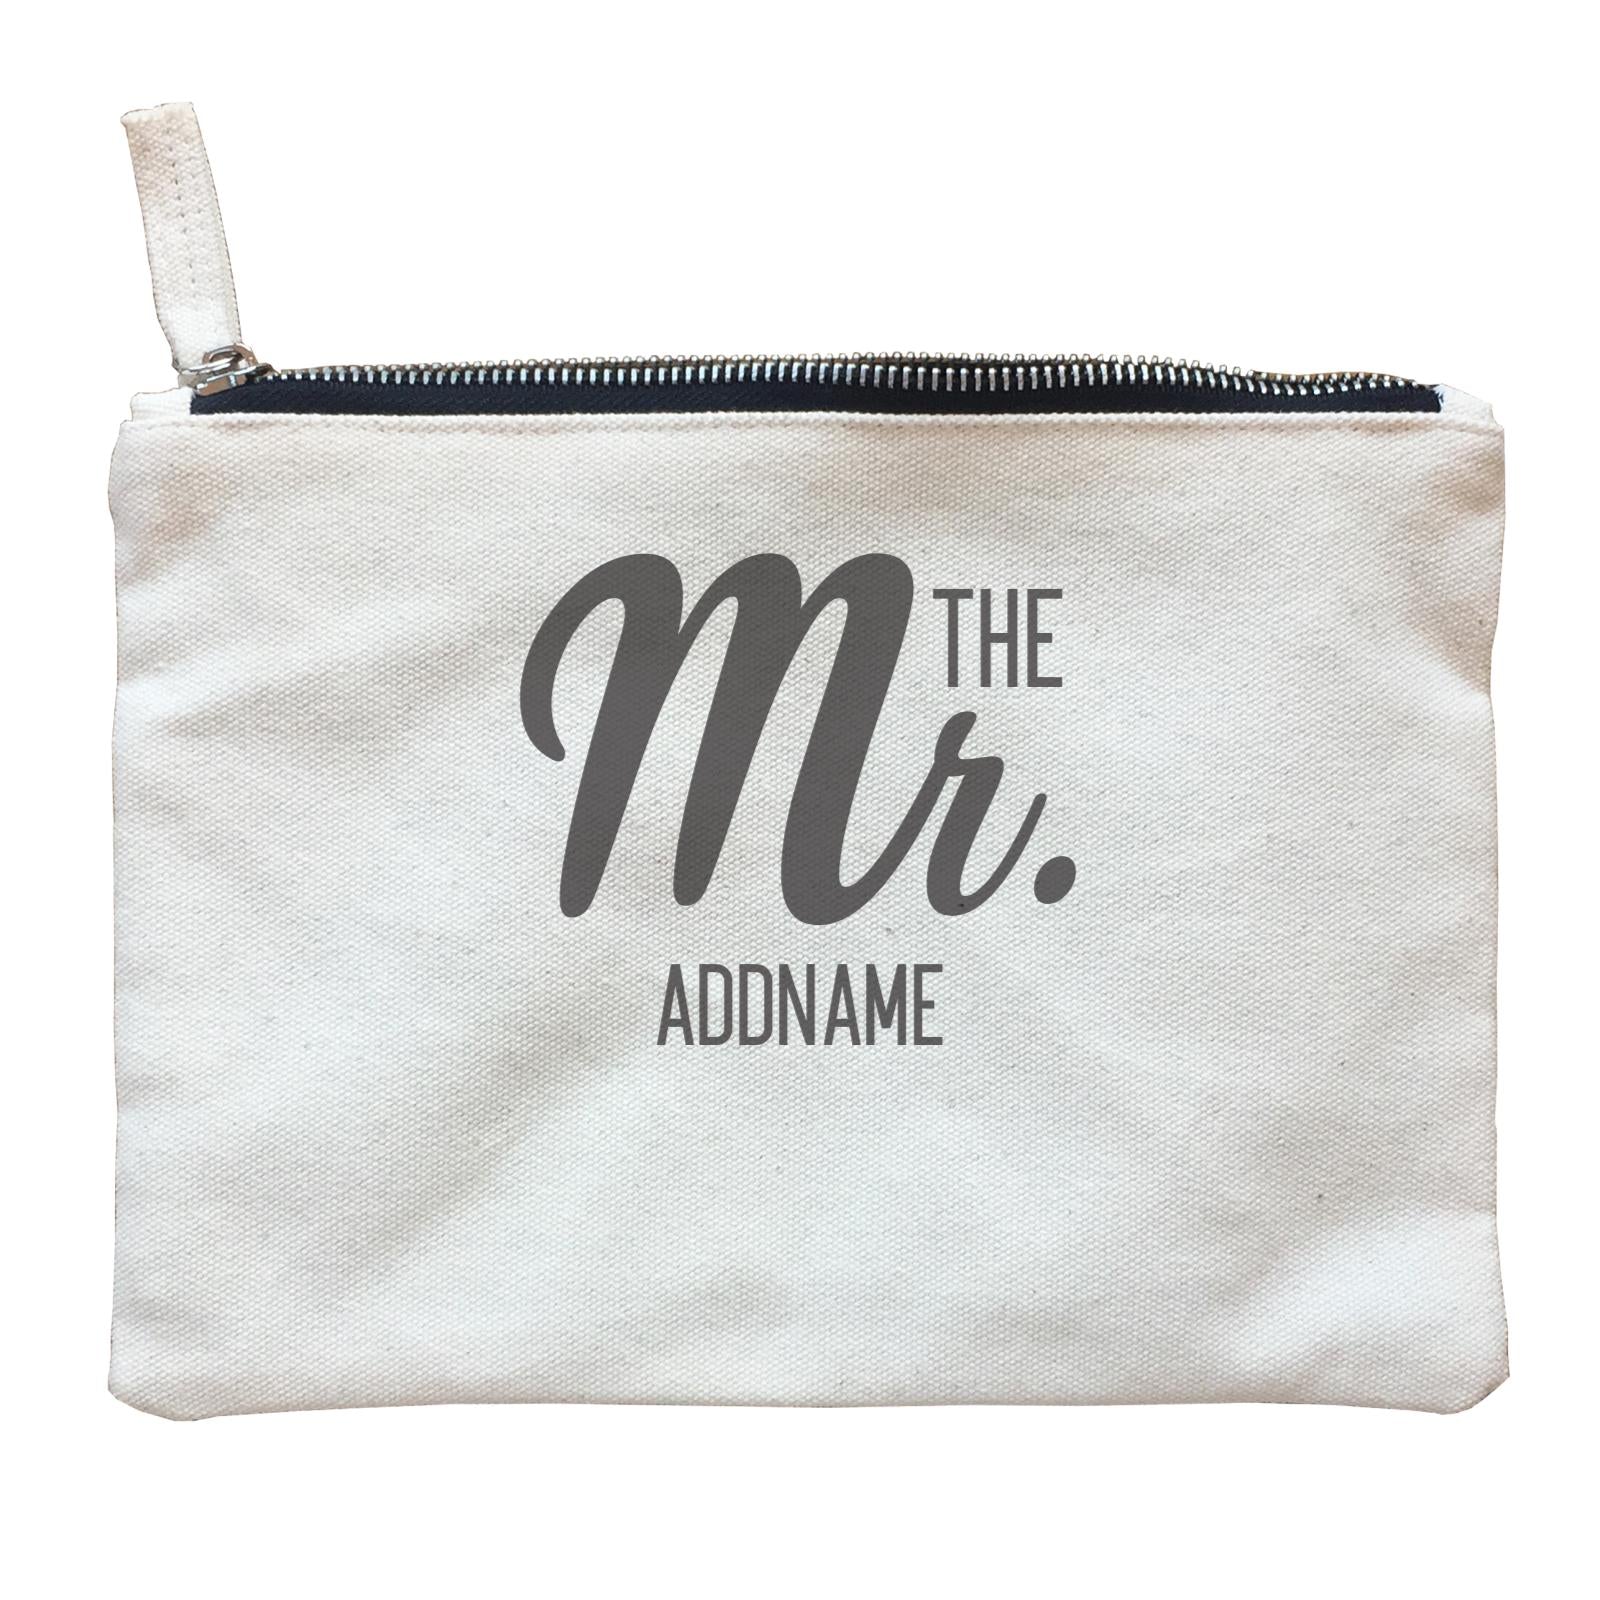 Husband and Wife The Mr. Addname Zipper Pouch